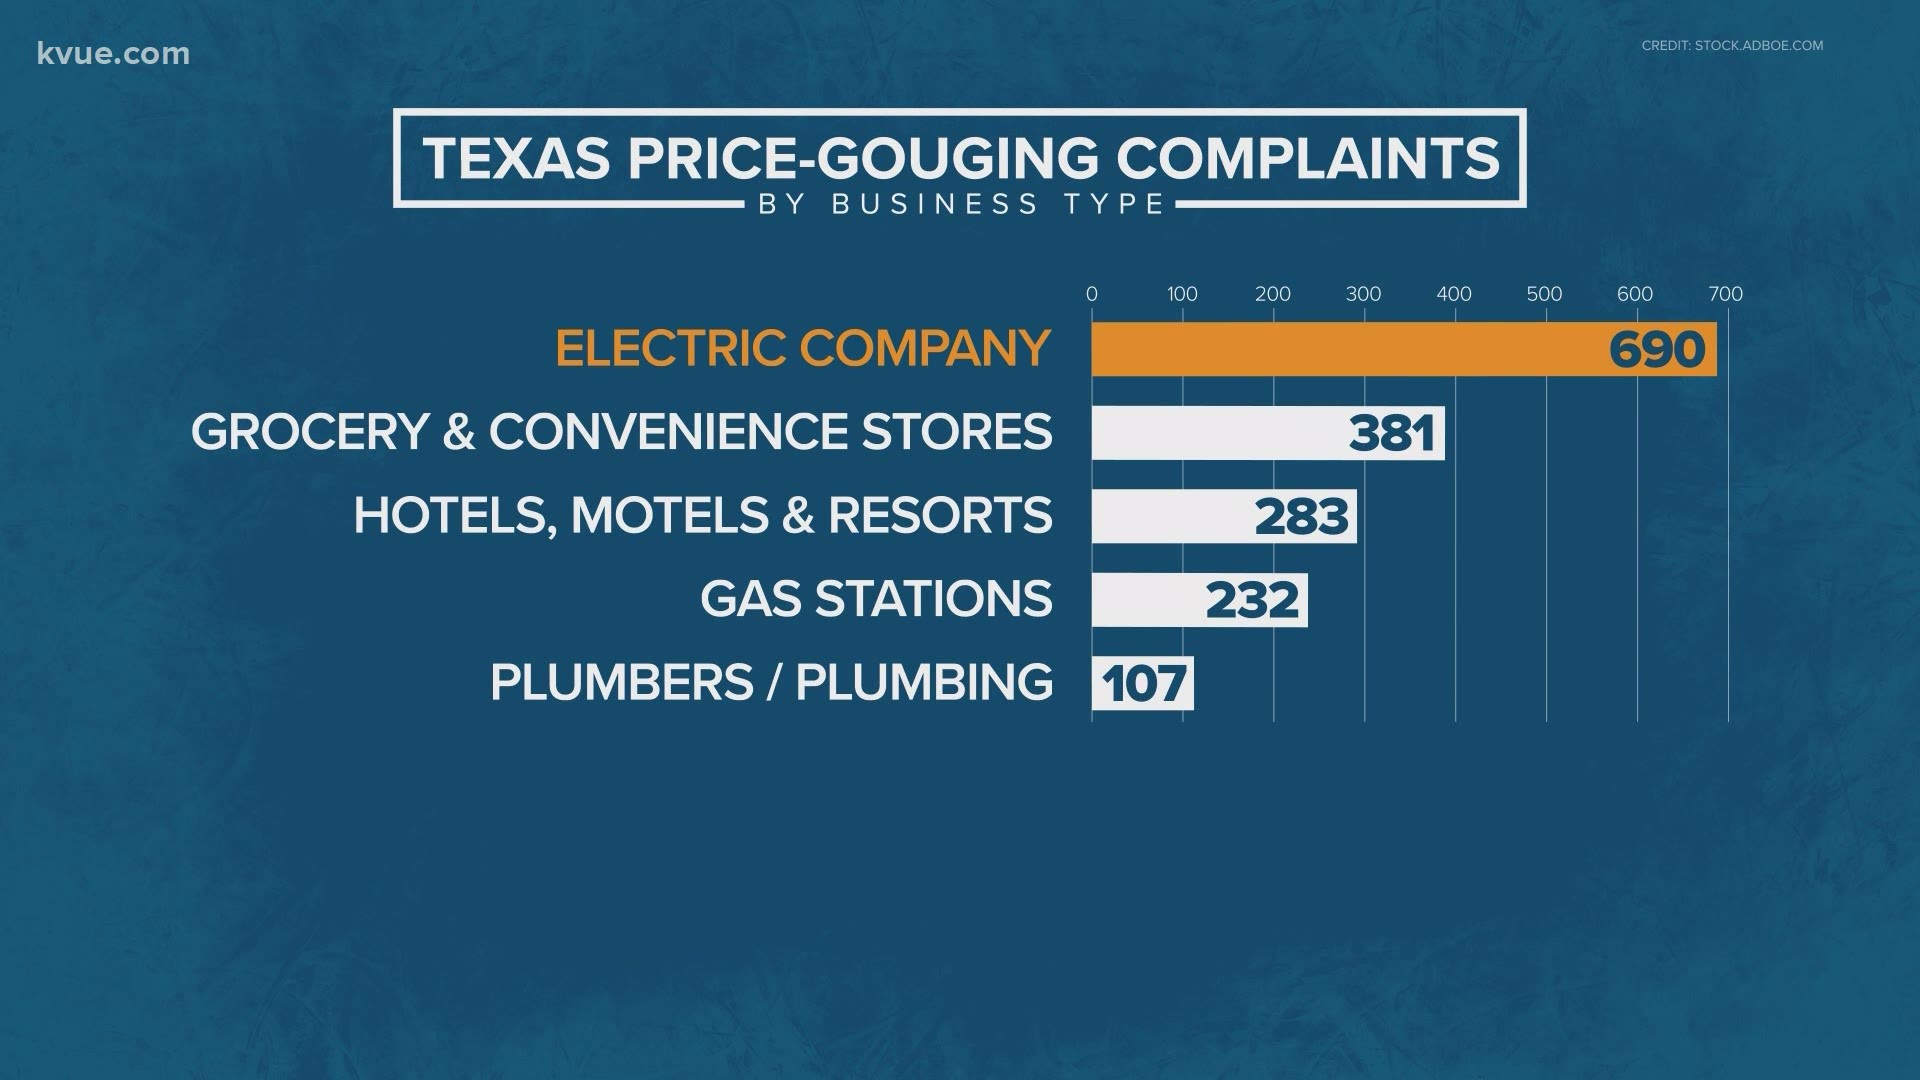 A large majority of complaints filed reported possible price gouging by electric utility companies, according to data from the Texas Office of the Attorney General.